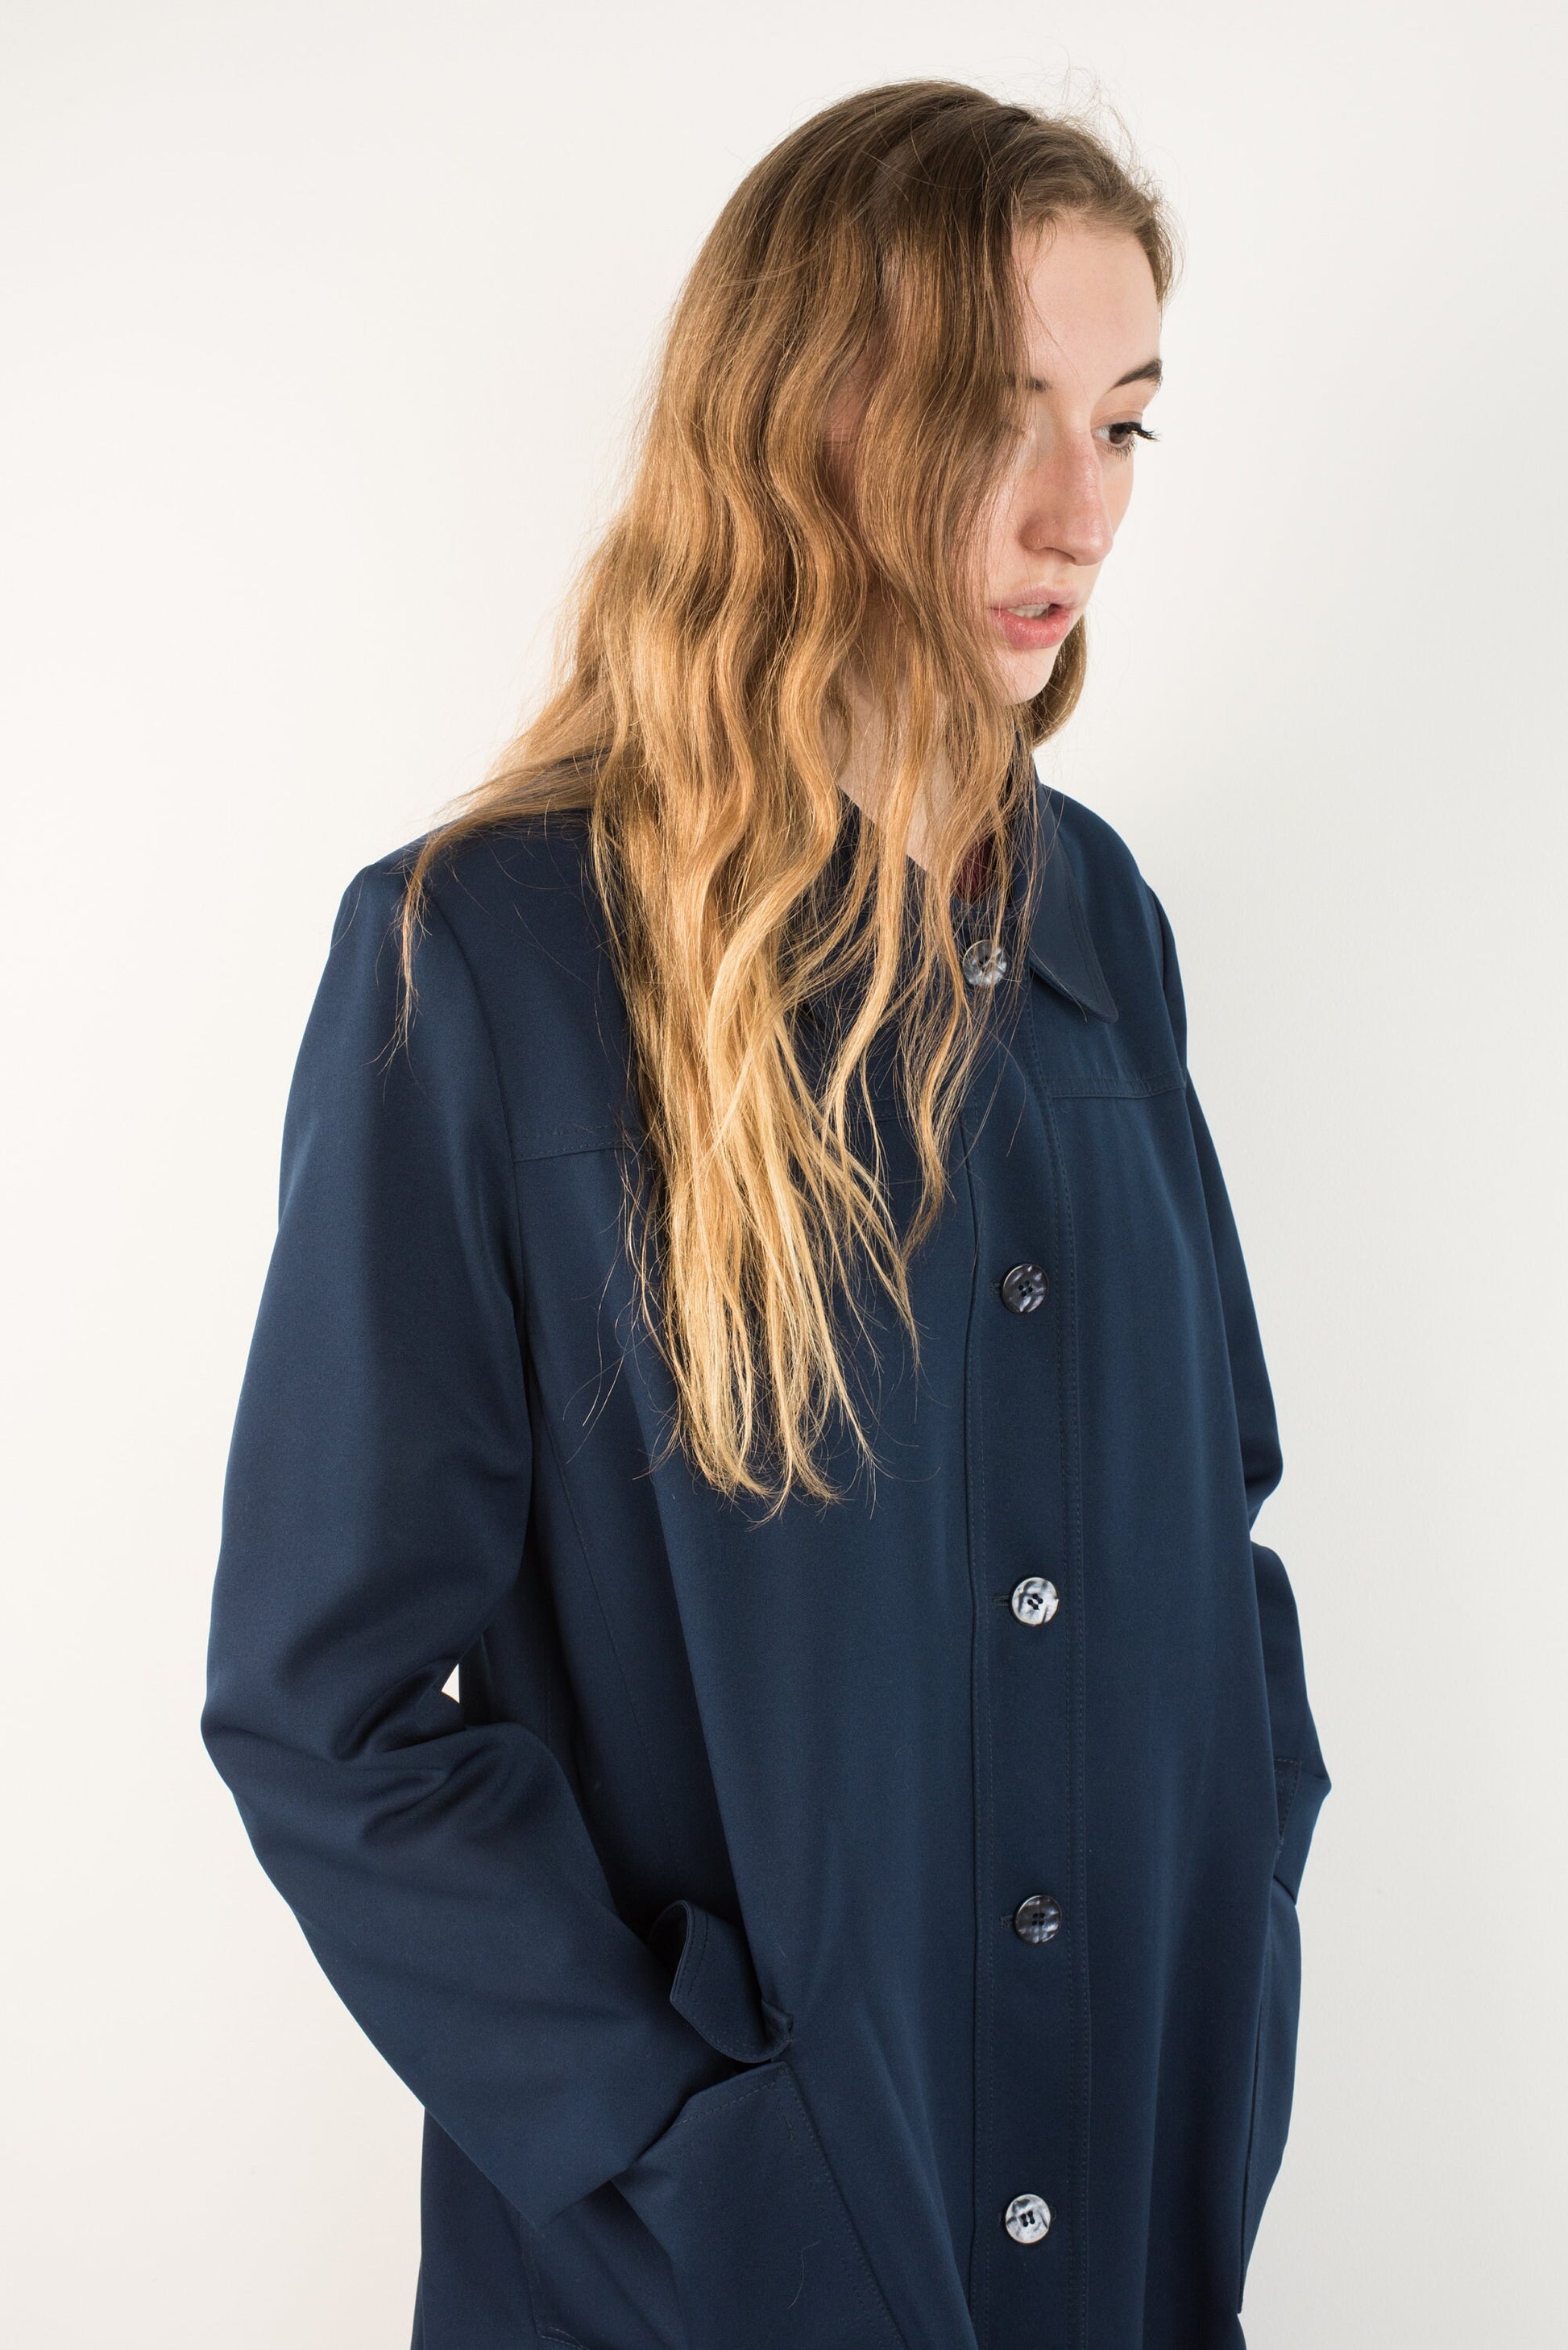 VINTAGE NAVY TRENCH Coat / 90s hipster jacket coat womens outerwear overcoat blue coat with detachable red wool lining